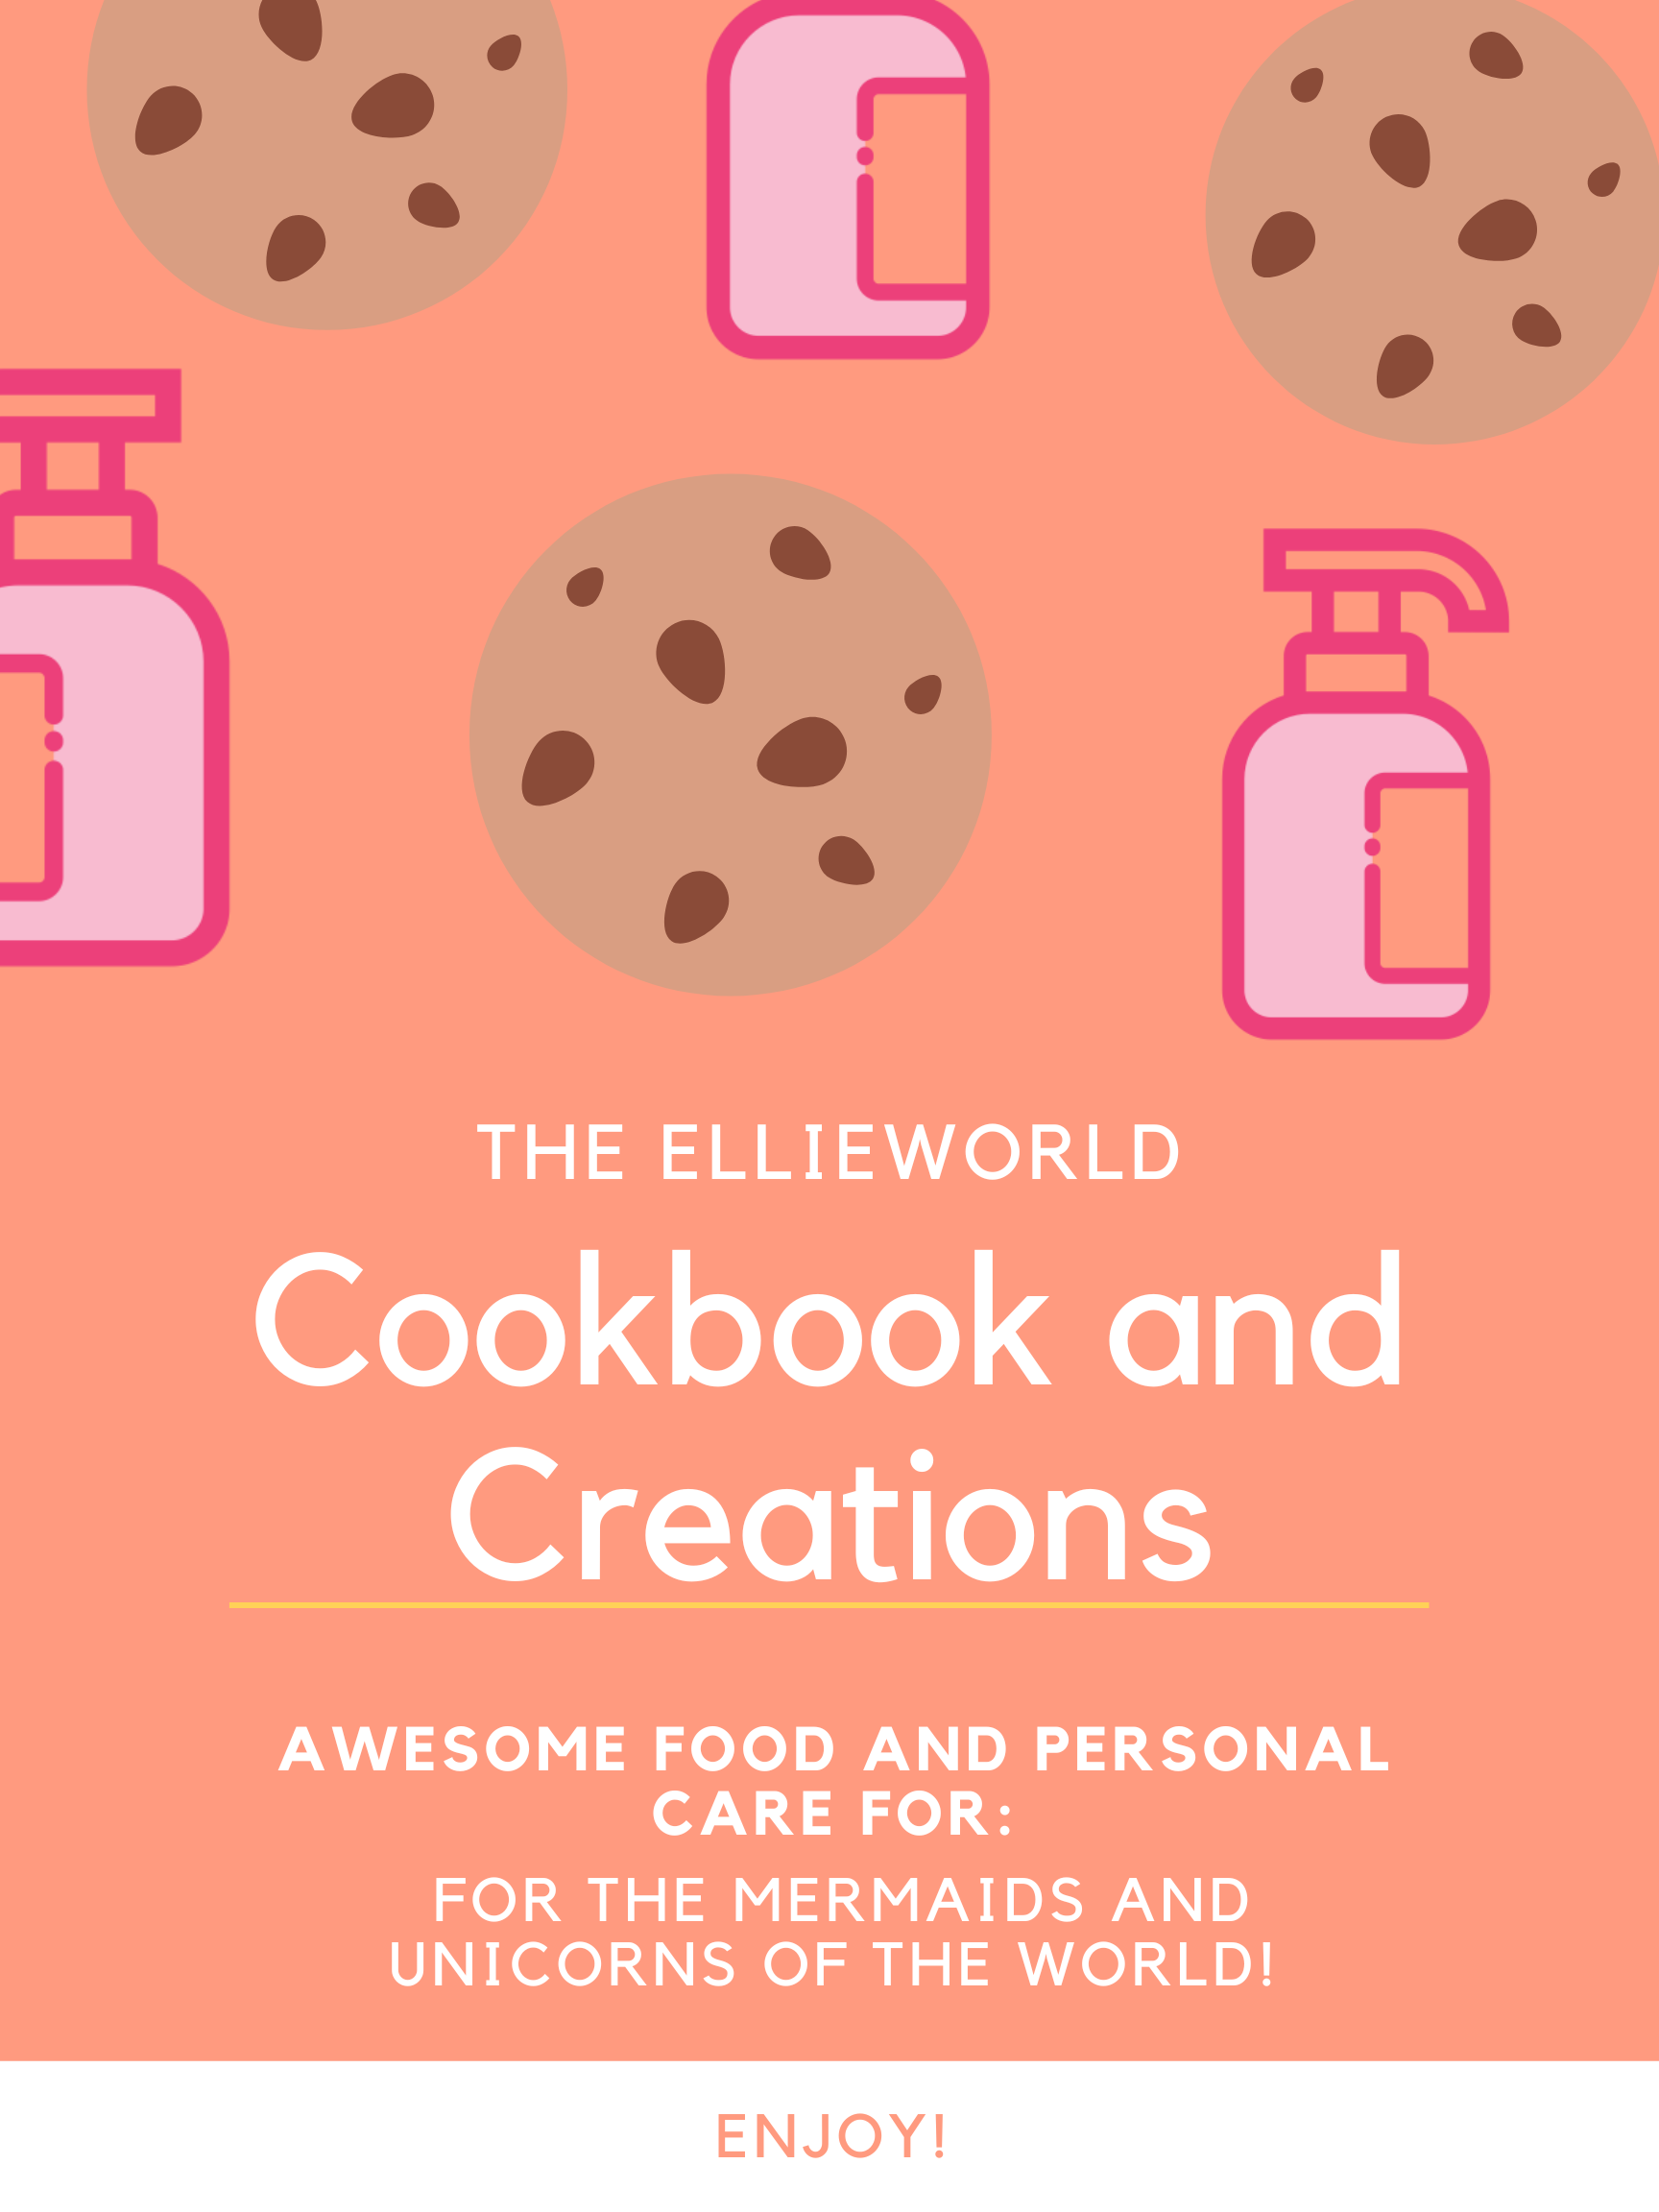 The Ellieworld Cookbook and Creations from Ellieworld Creations